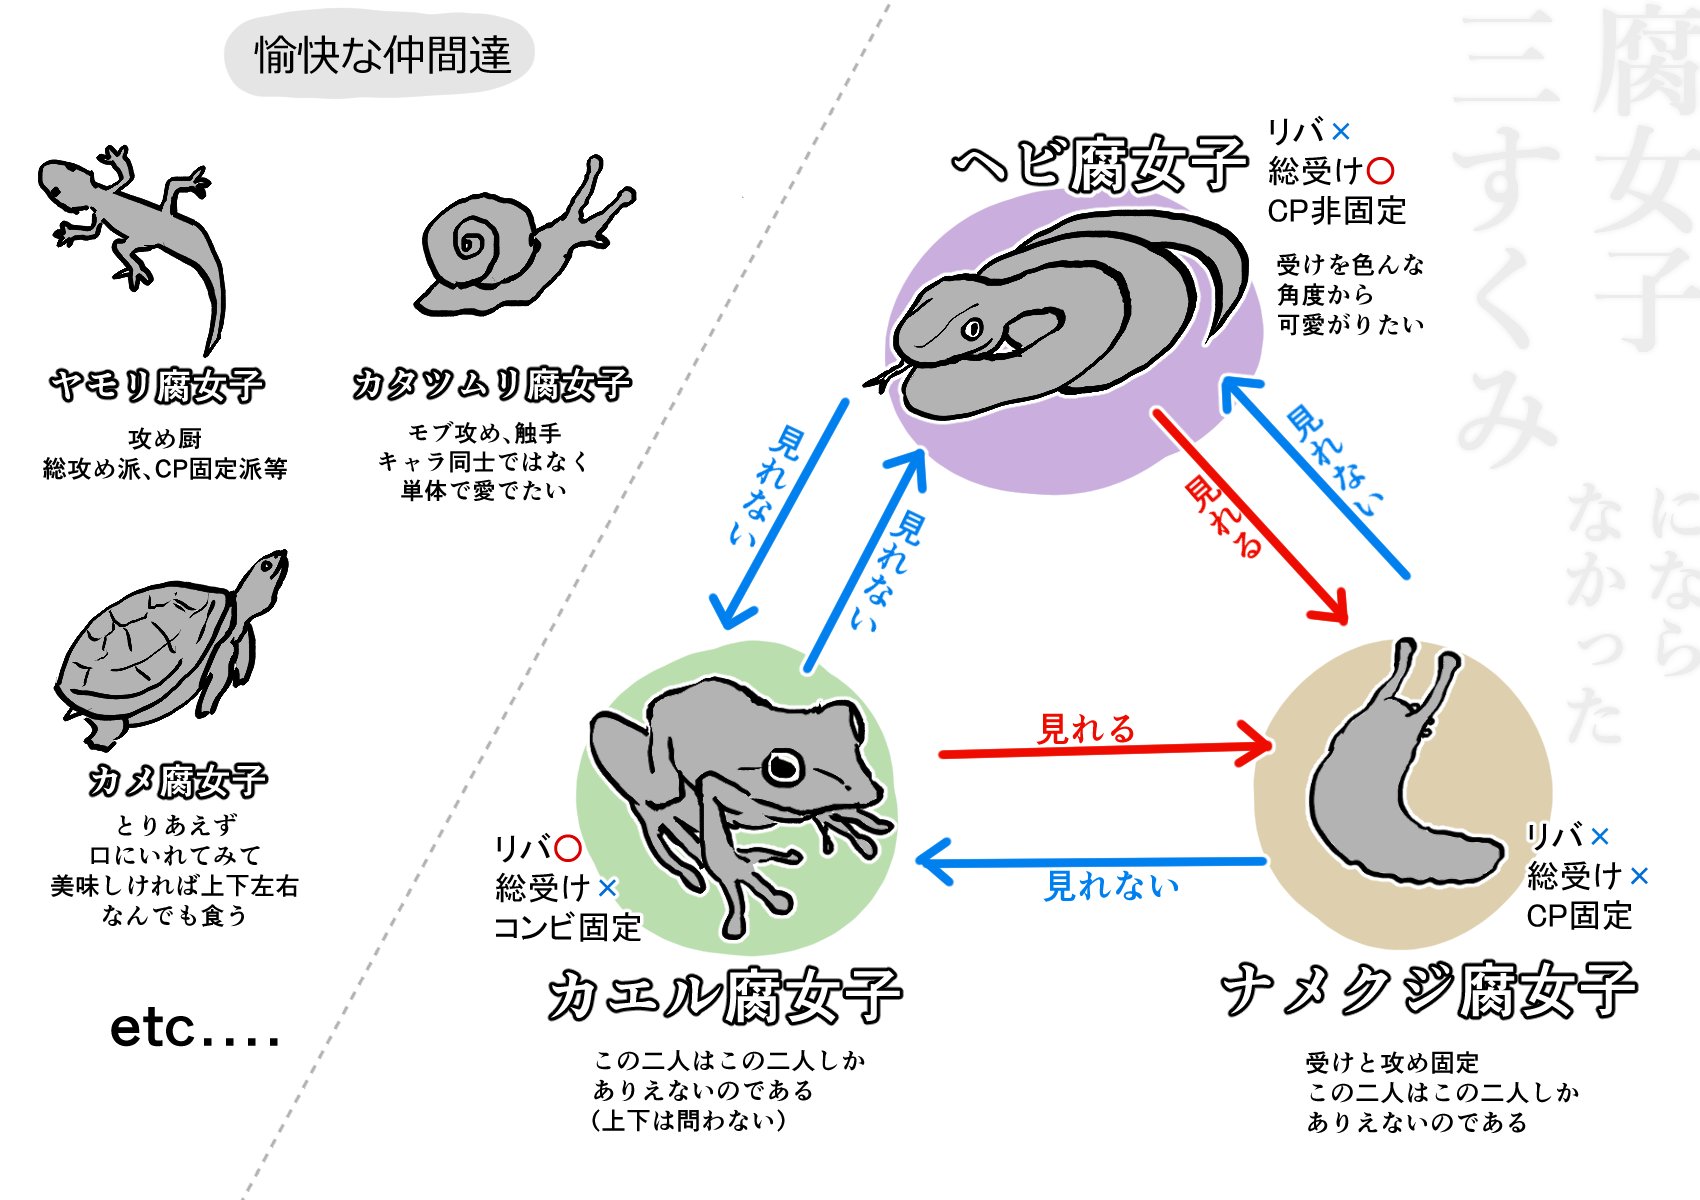 A drawing of the three main types of fujin and their subtypes as a frog, snake, slug, snail, gecko, and turtle.